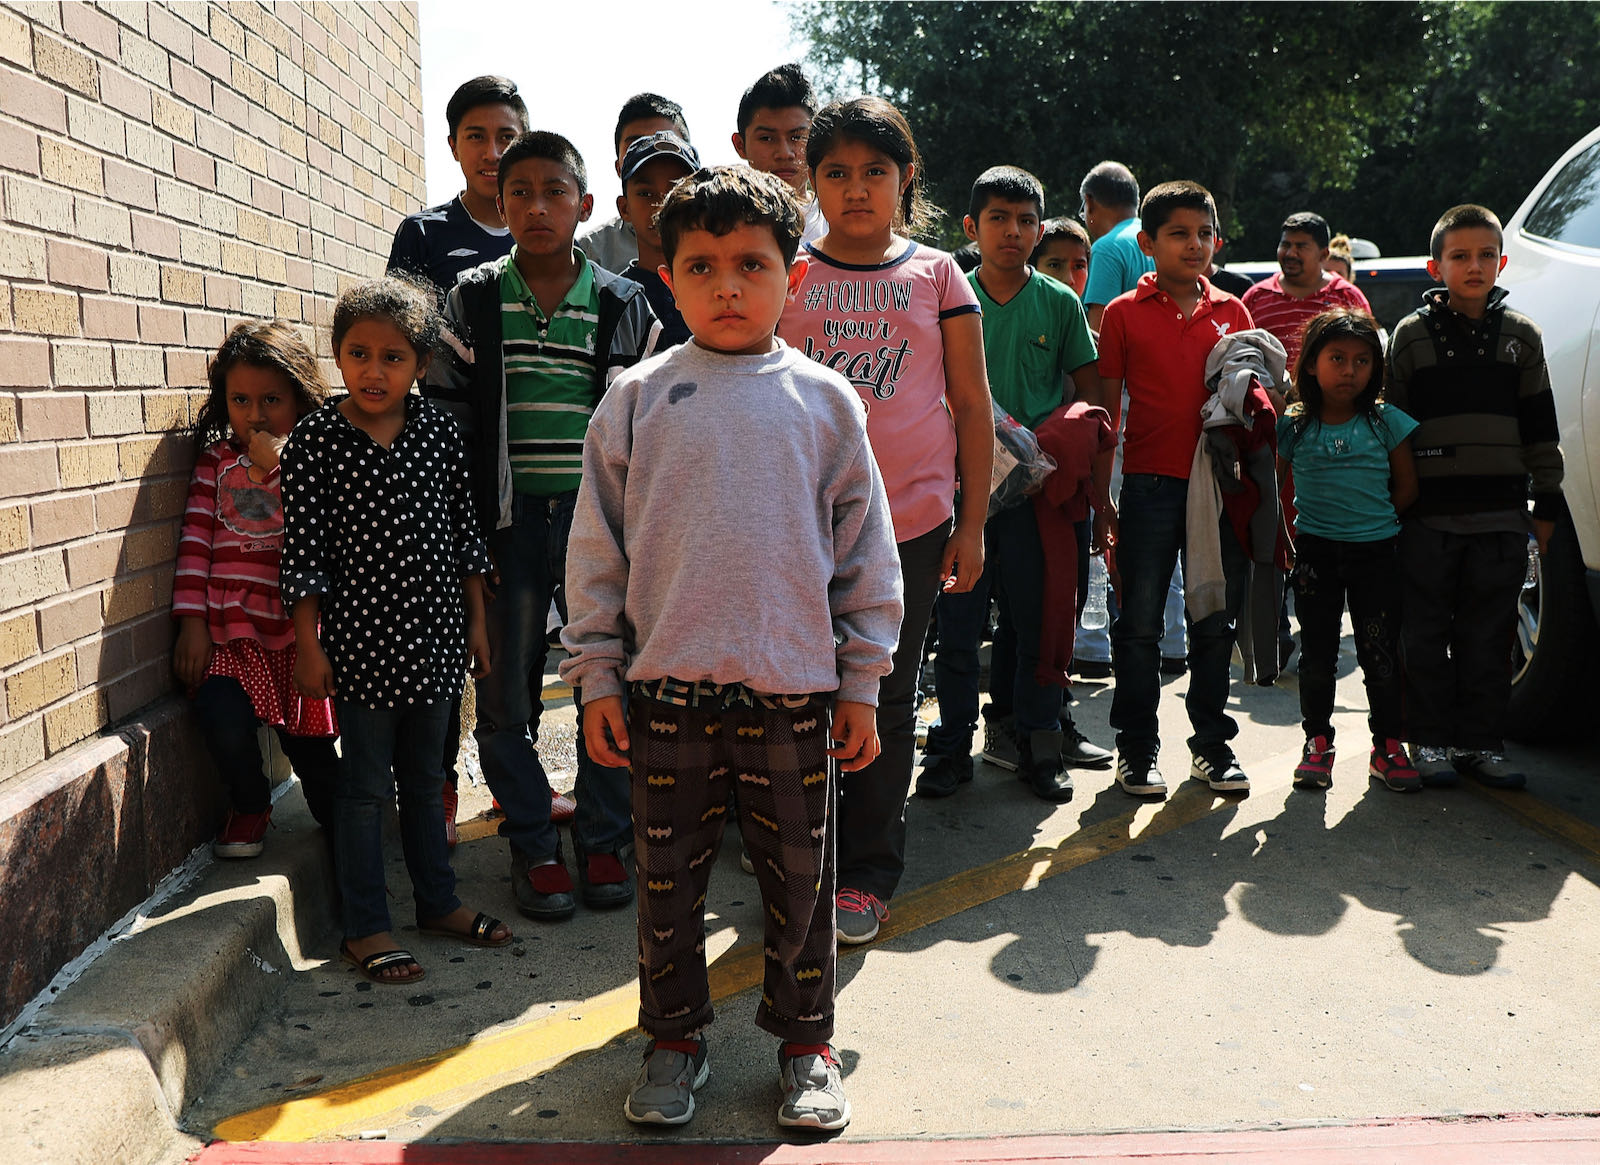 Central American migrant children waiting for assistance, McAllen, Texas, 2018